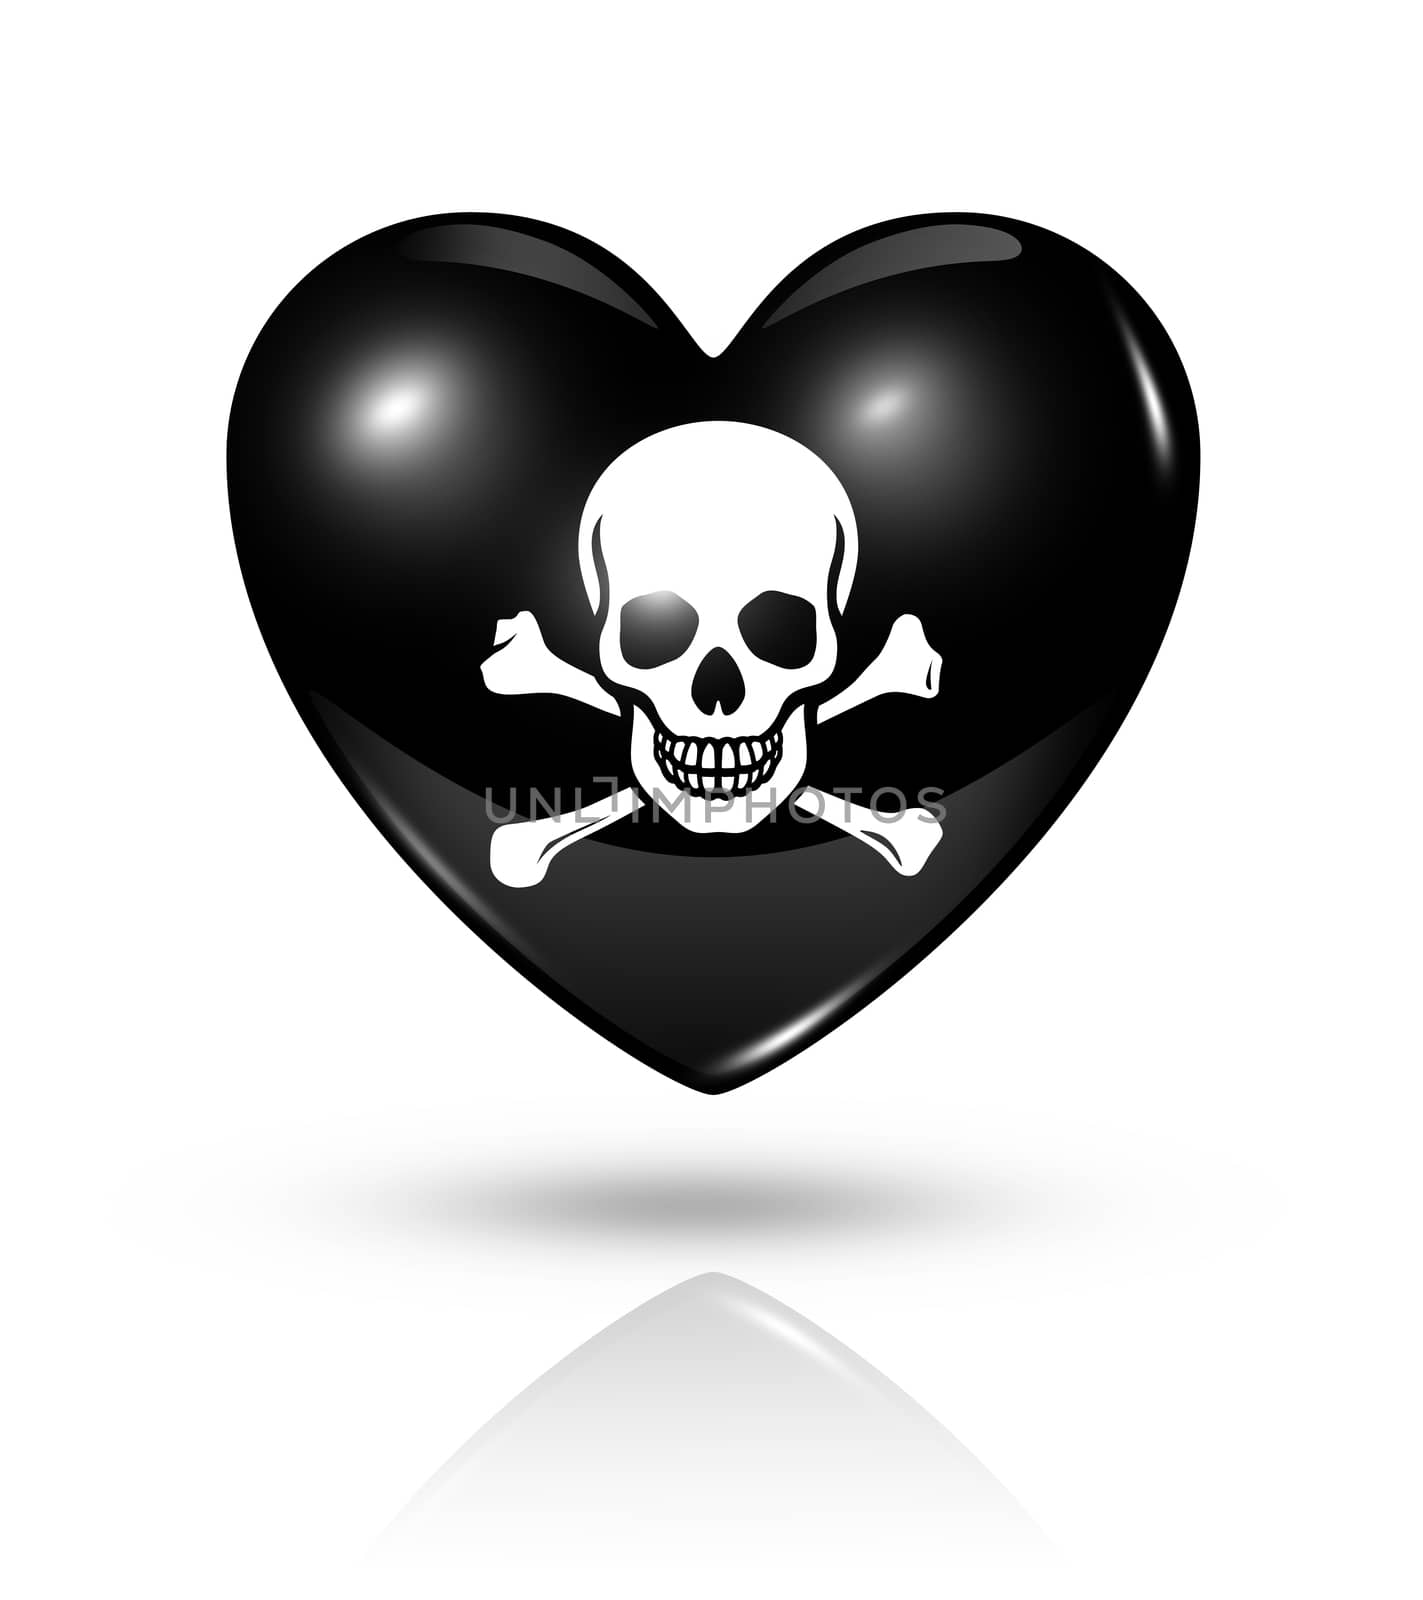 Love pirate, heart icon by daboost